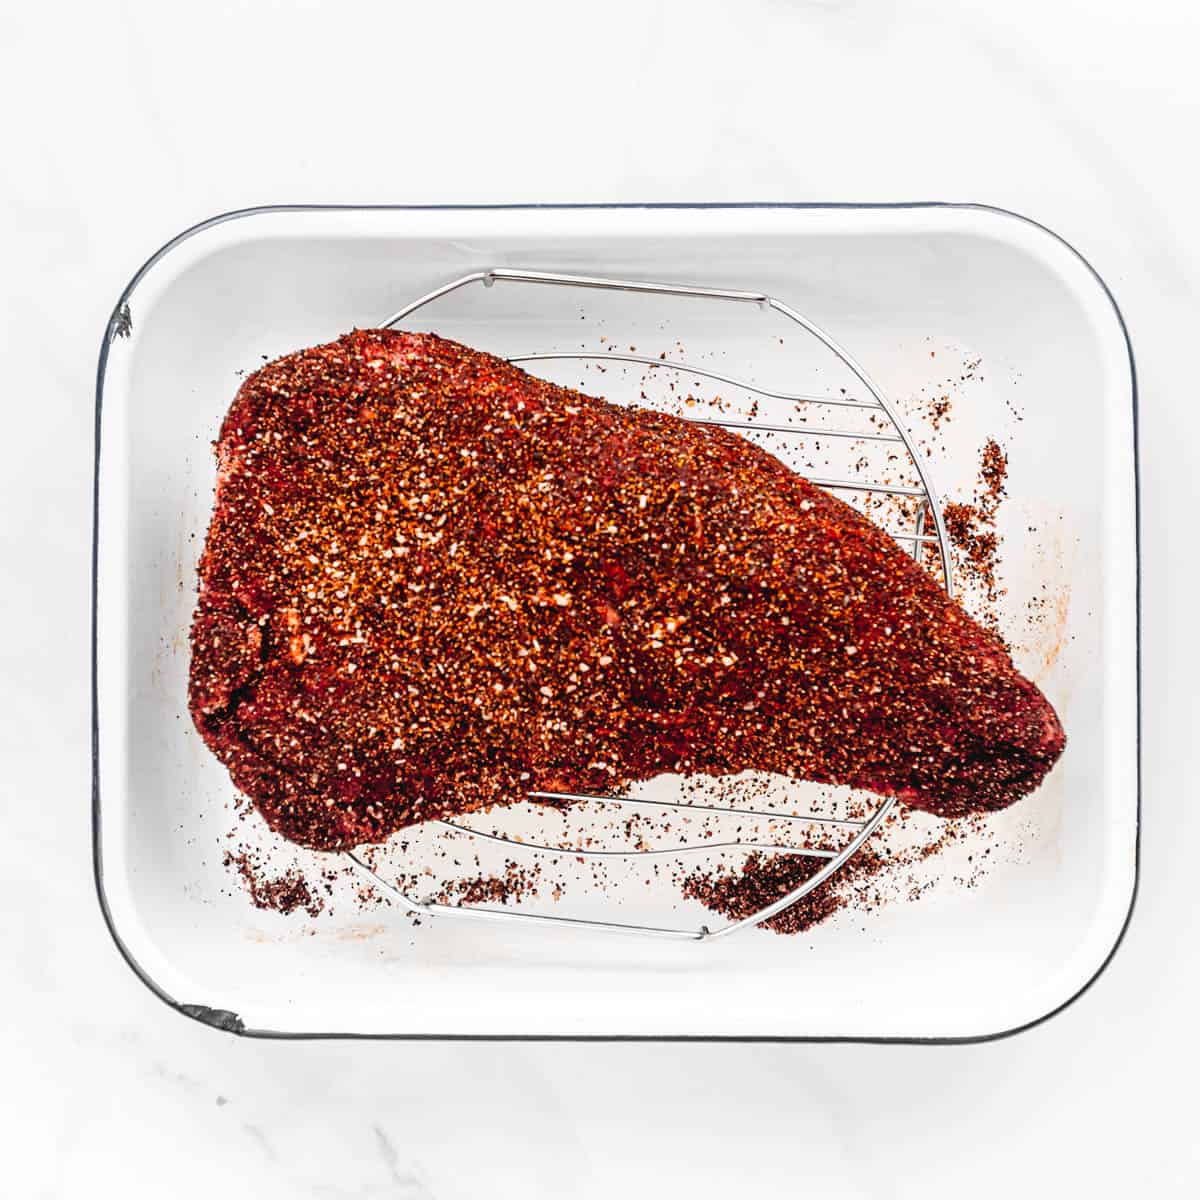 How to Apply Coffee Rub to Tender Cuts of Steak